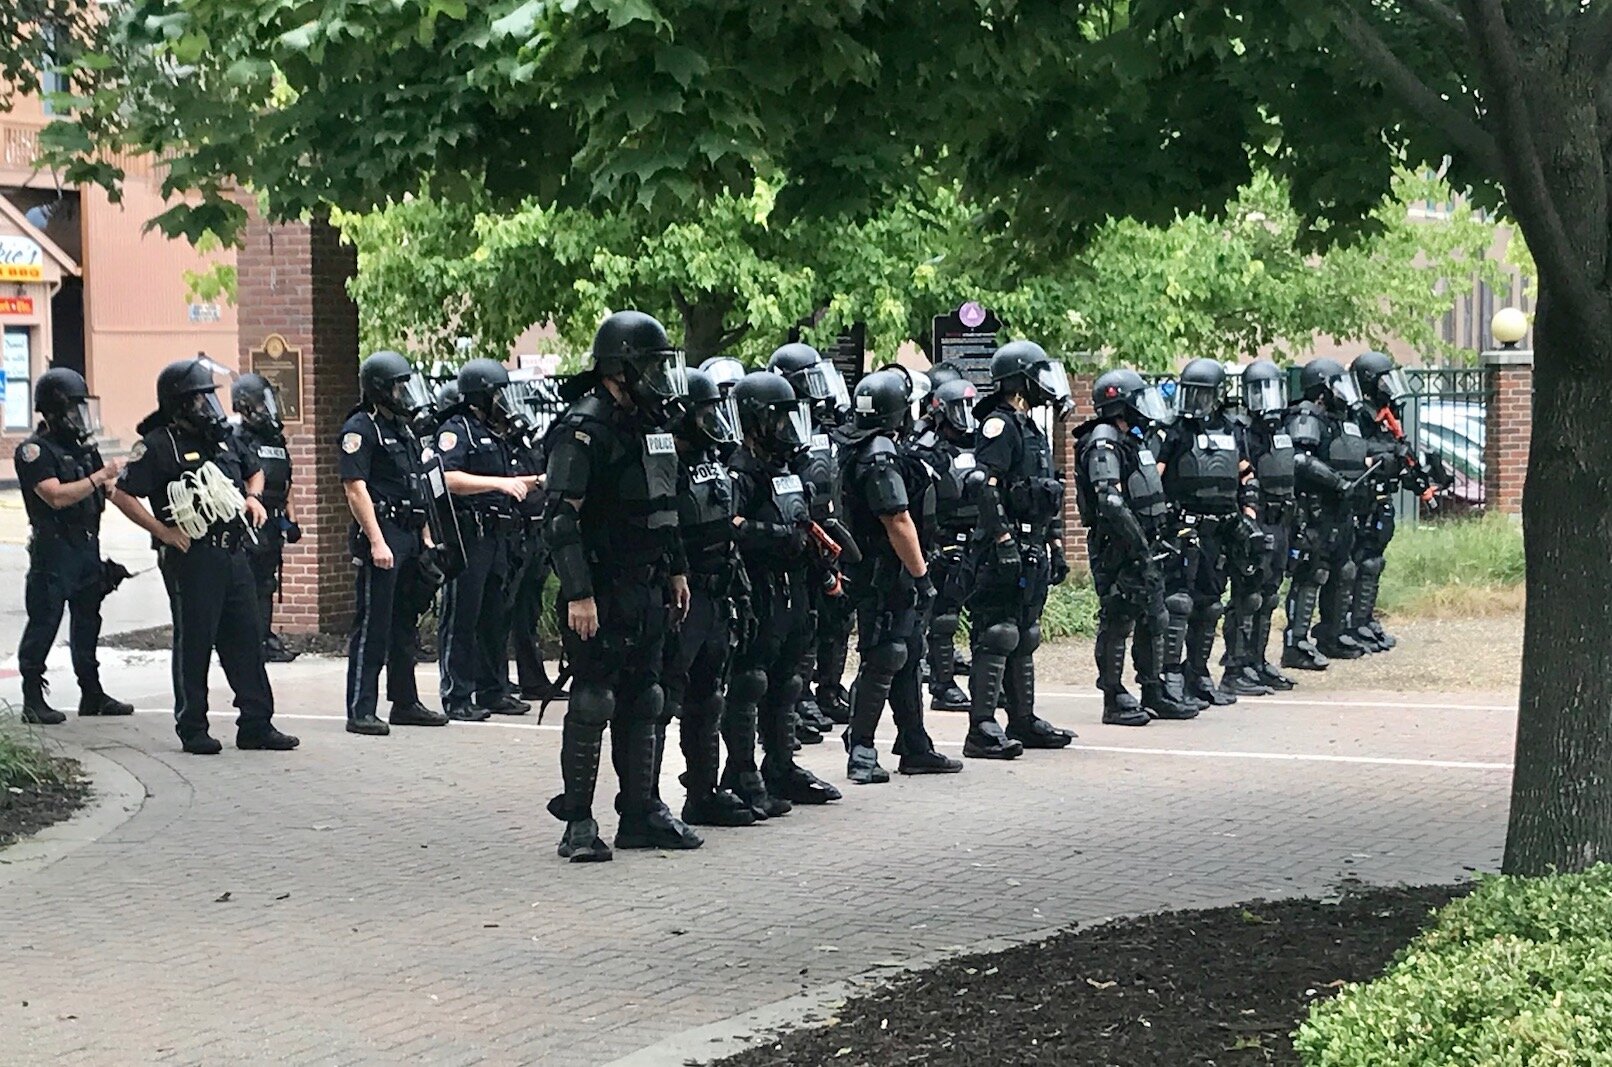 The response of Kalamazoo police to civil unrest during the summer of 2020 is the focus of a new 111-page report. Kalamazoo officers are shown preparing to clear the Arcadia Greek Festival Site on Aug. 15, 2020.